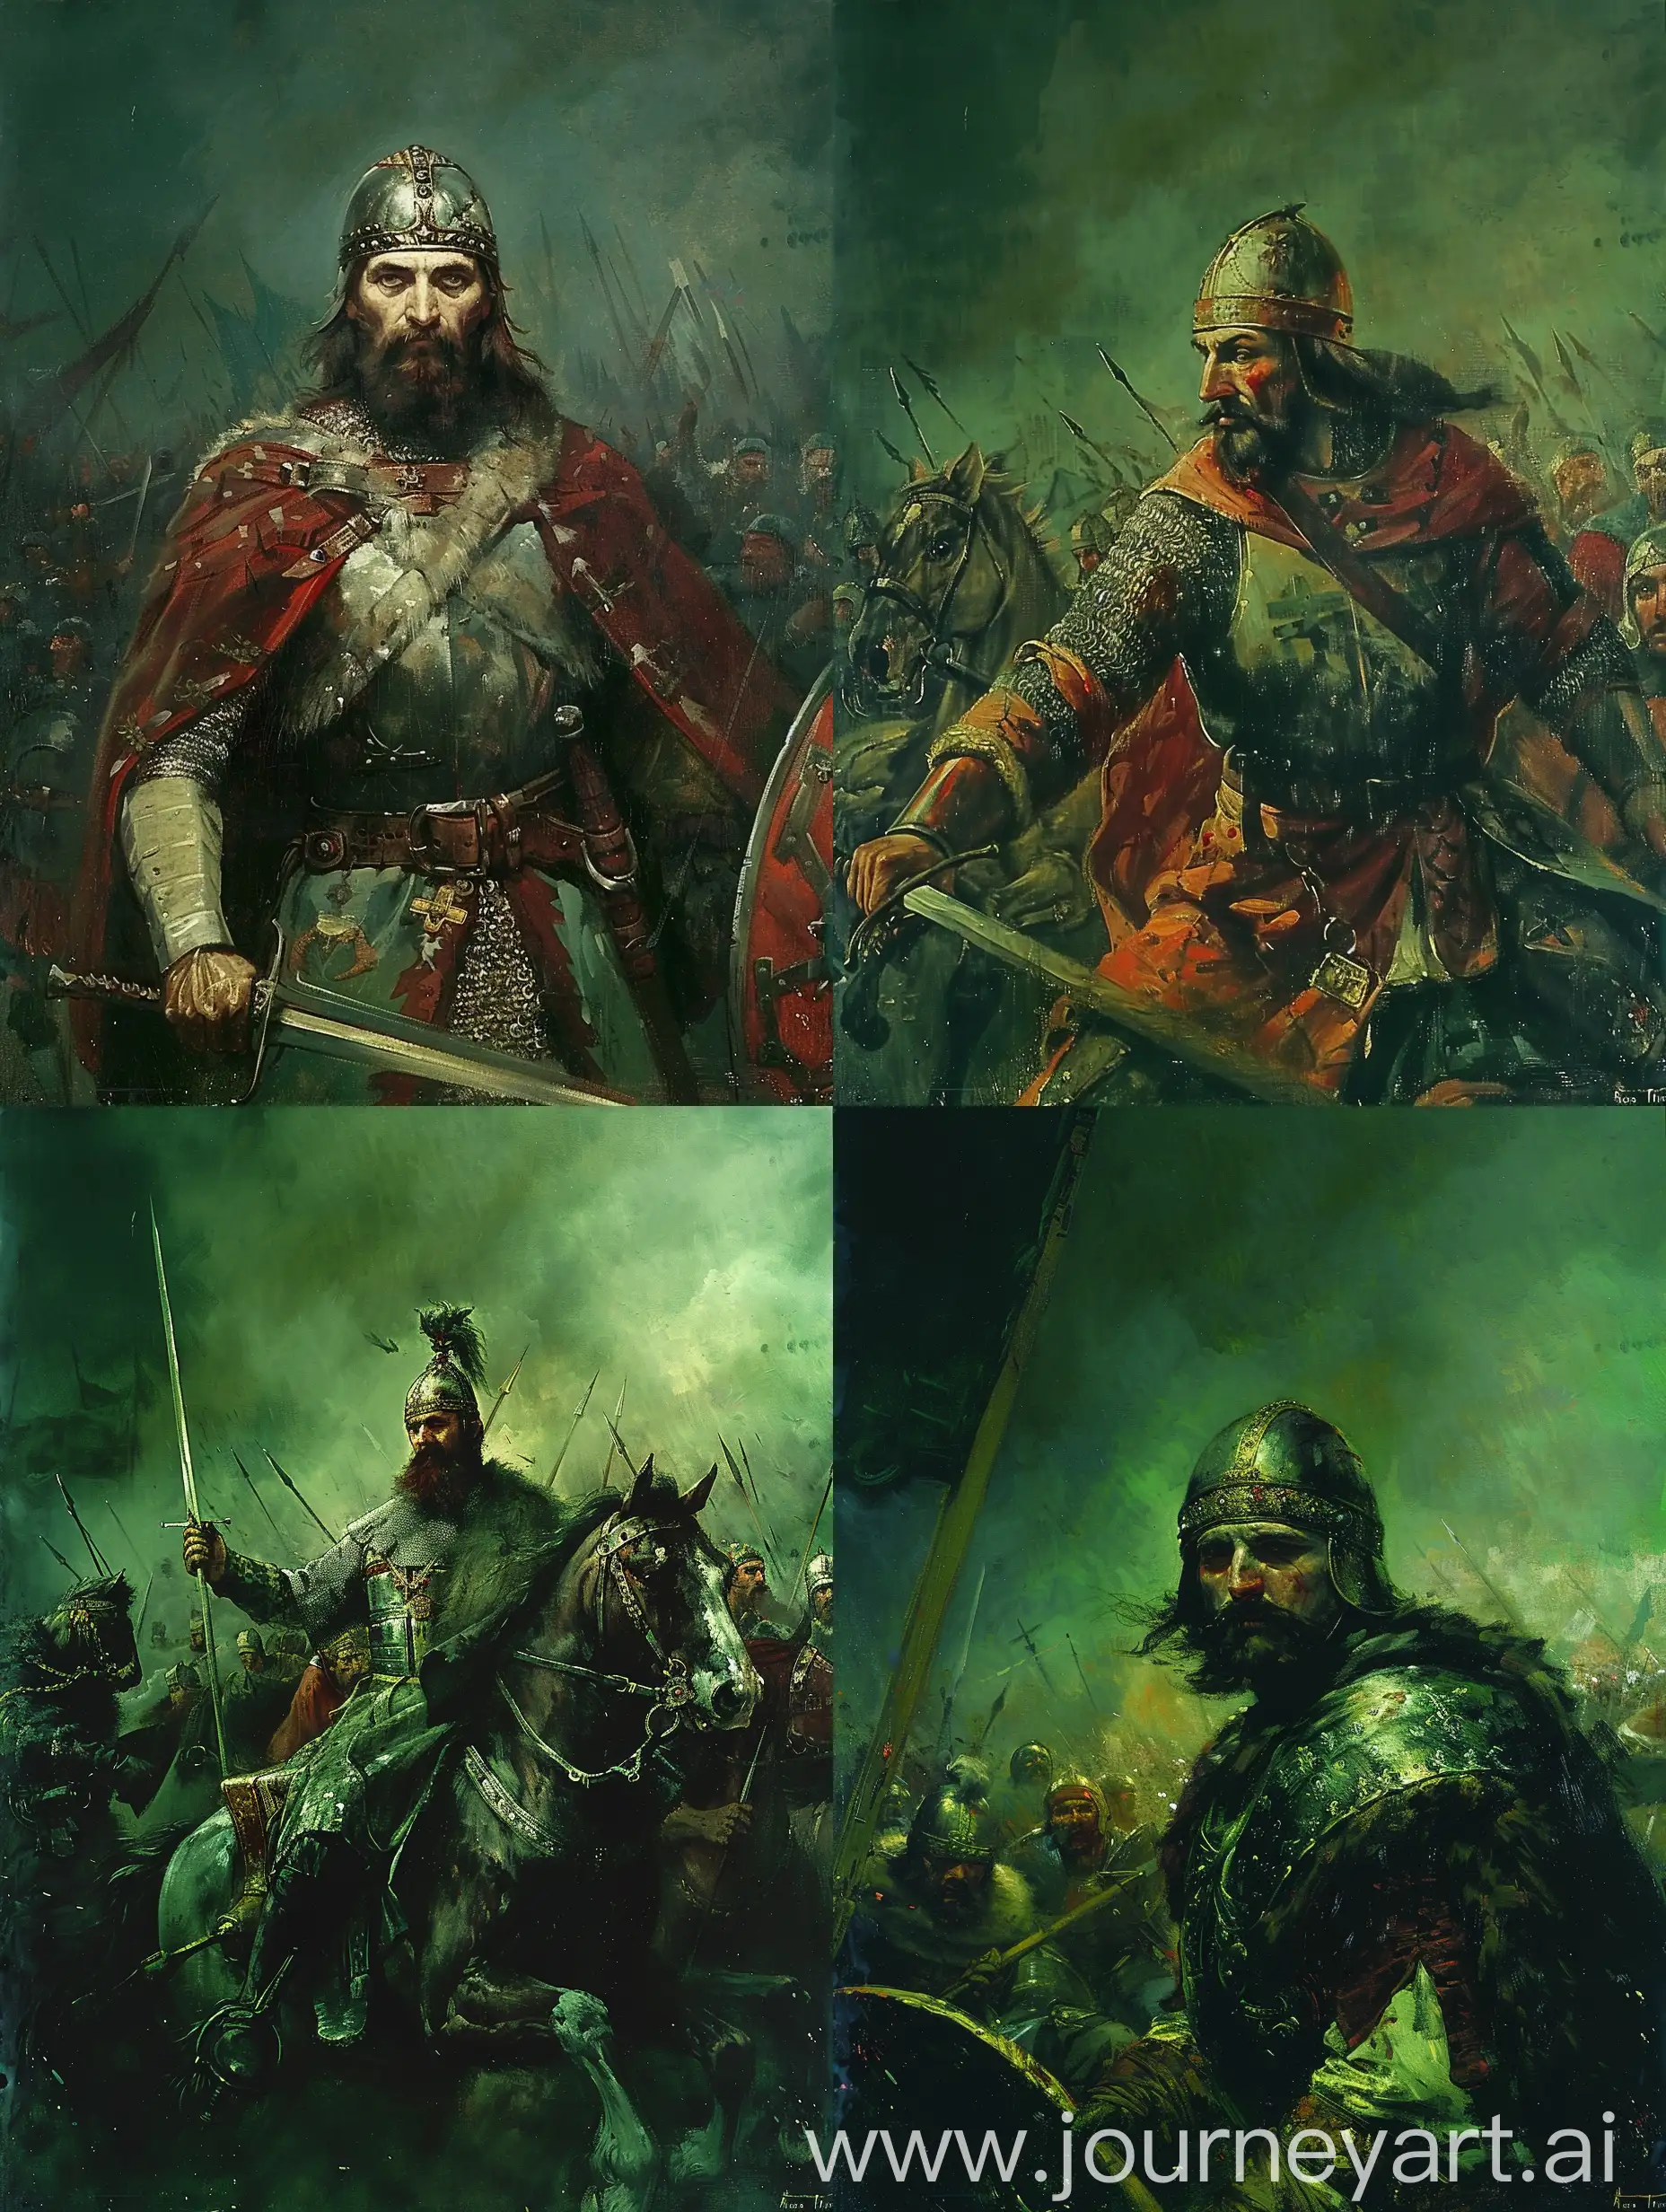 Sviatoslav-I-in-Epic-Battle-Grand-Prince-of-Kiev-Conquering-in-Dark-Green-Ambiance